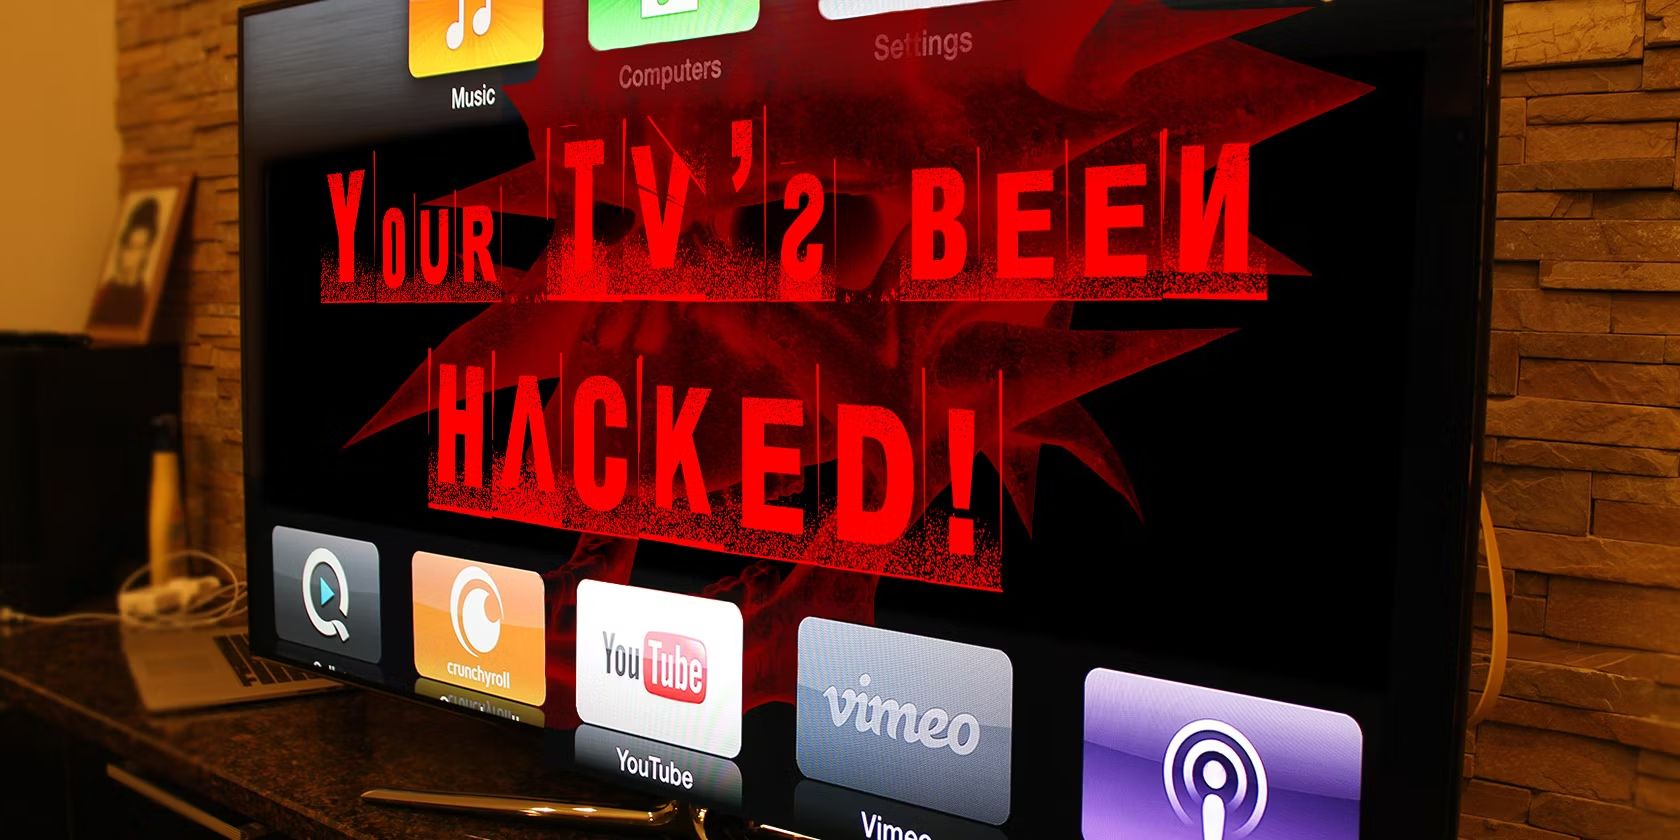 What To Do If Your Smart TV Has Been Hacked